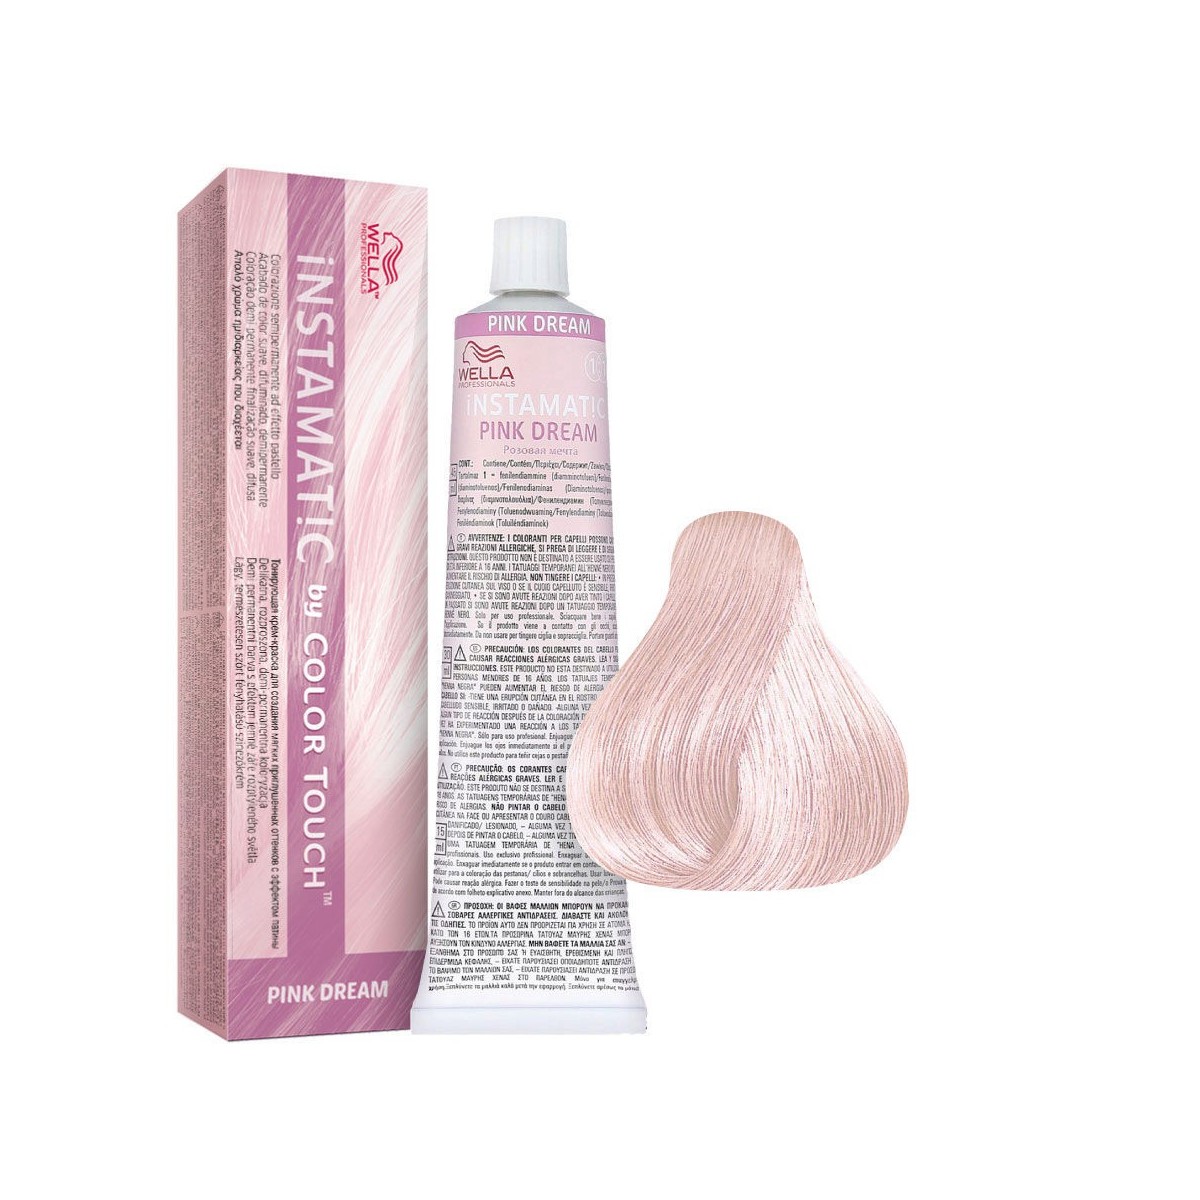 Розовый крем для волос. Wella Instamatic by Color Touch. Wella Color Touch Instamatic. Wella крем-краска Color Touch Instamatic. Wella Instamatic палитра.